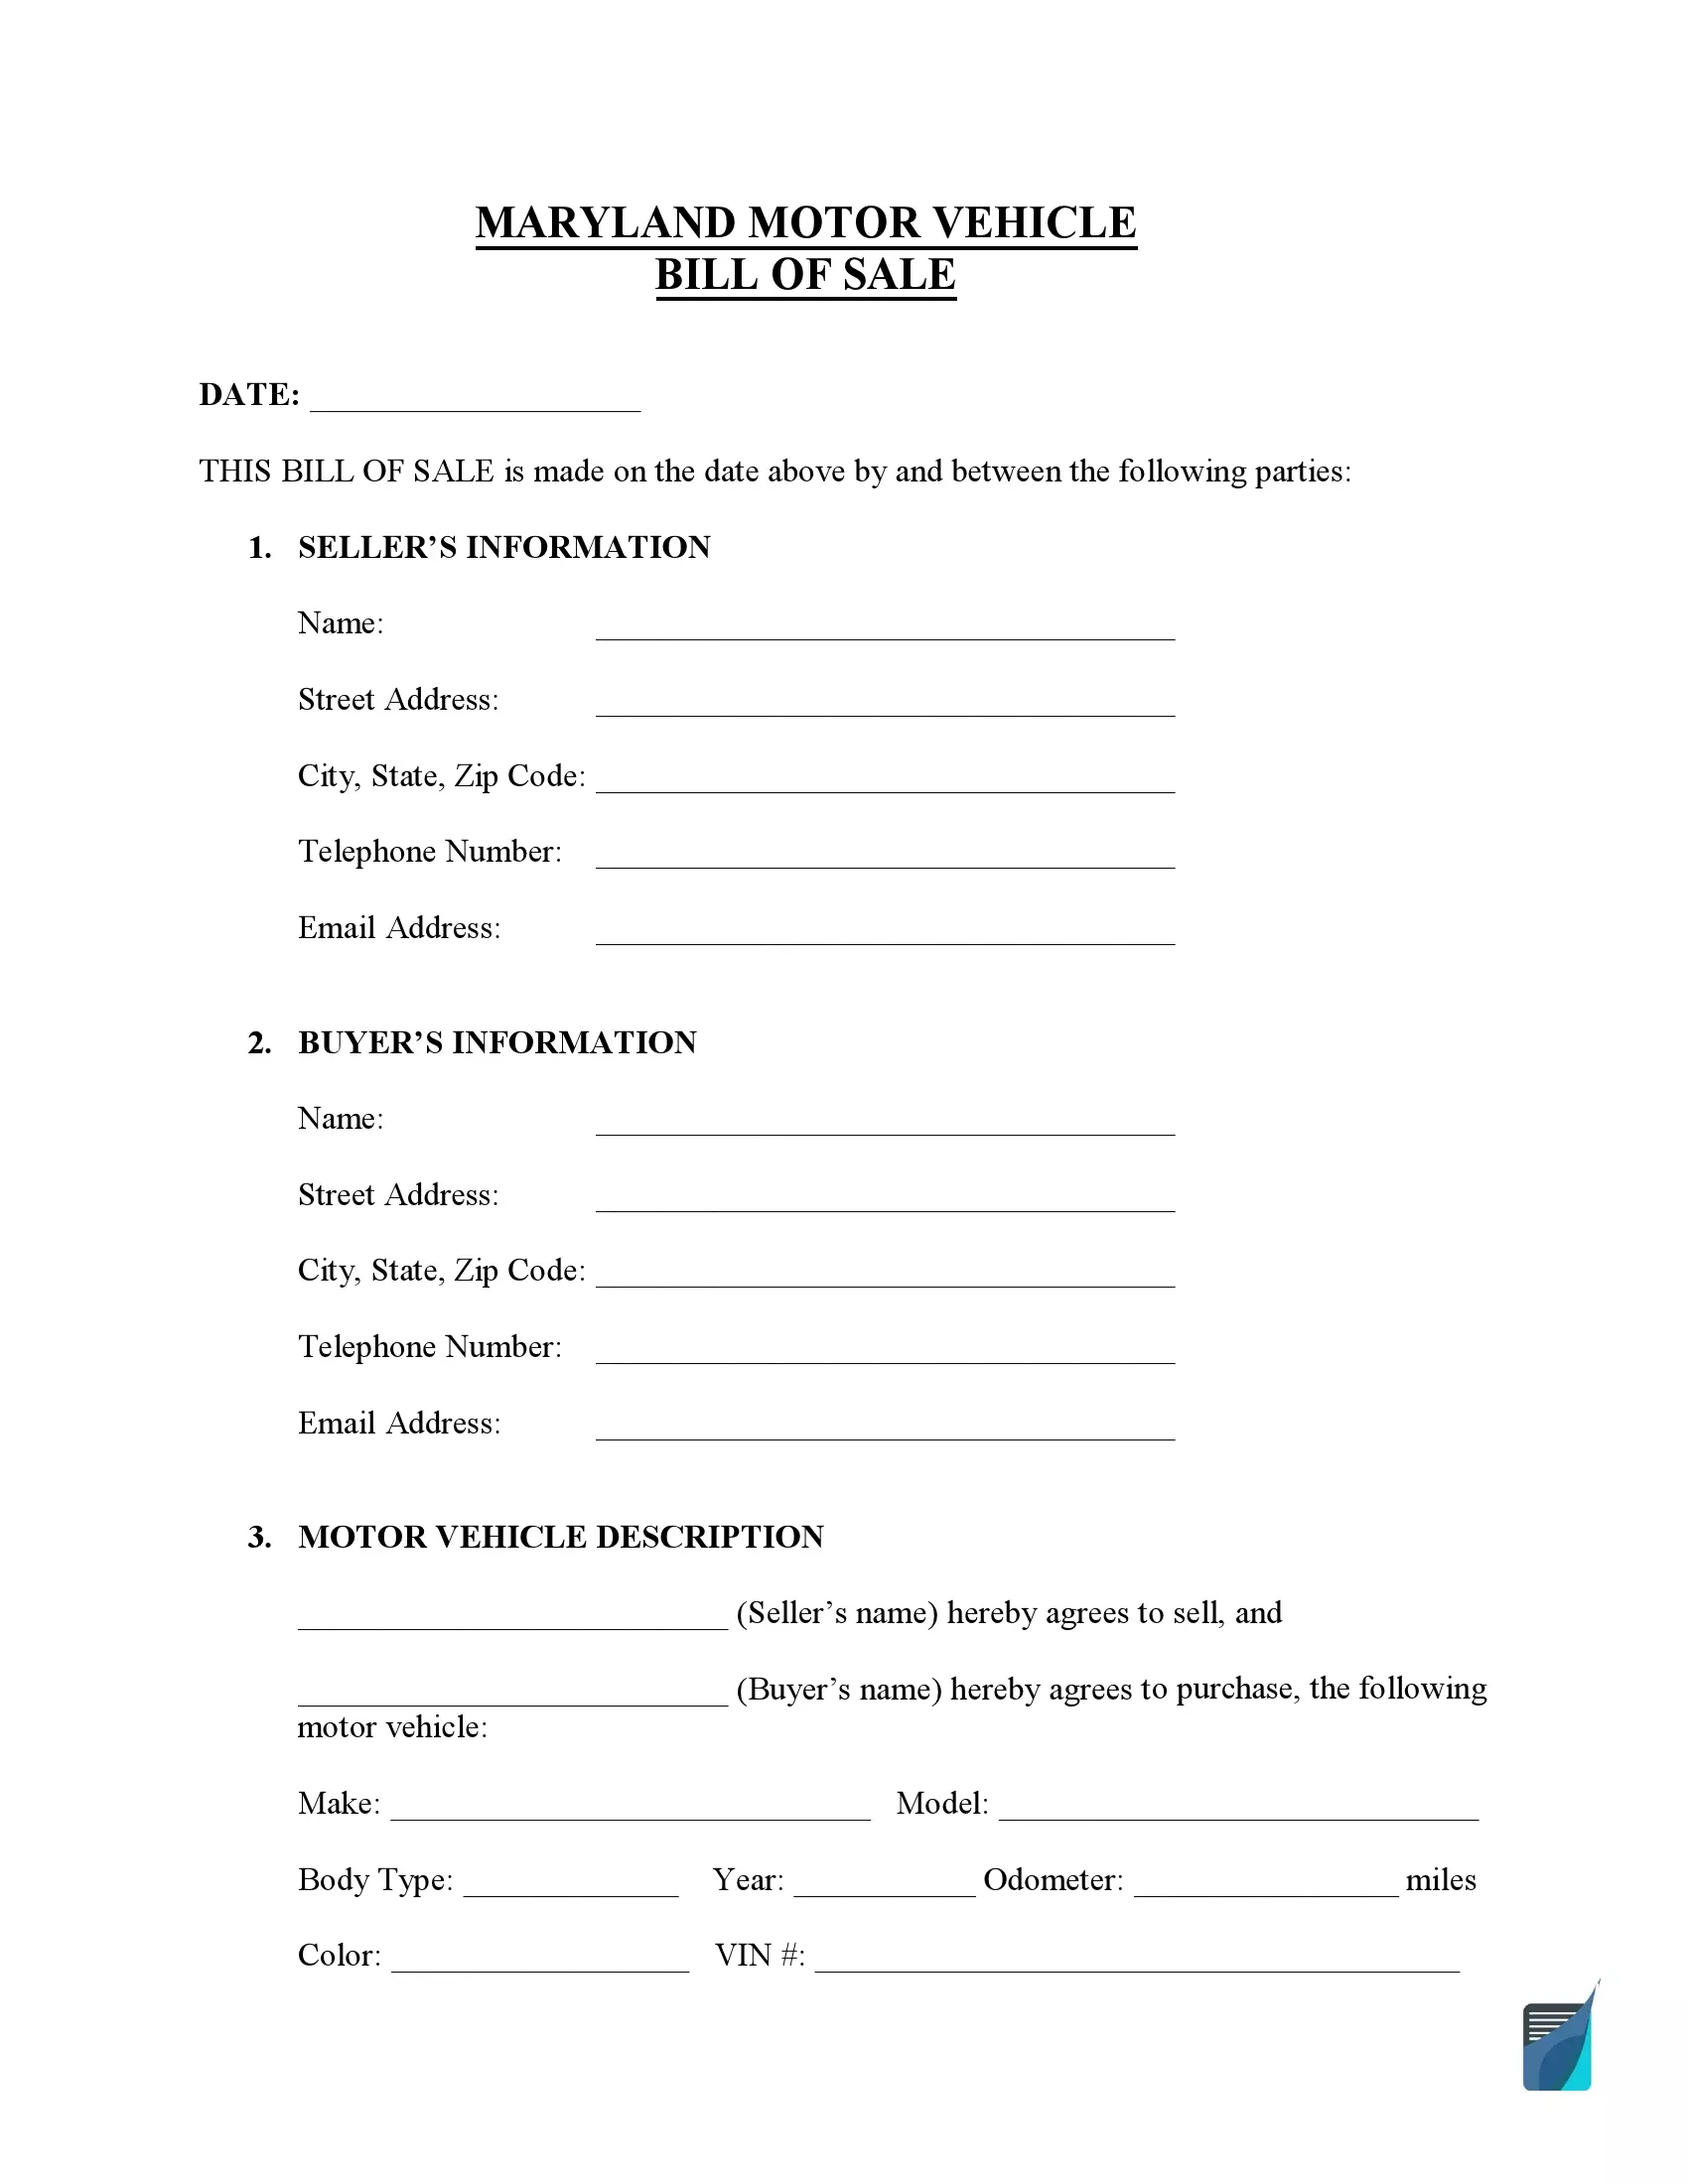 Maryland motor vehicle bill of sale template